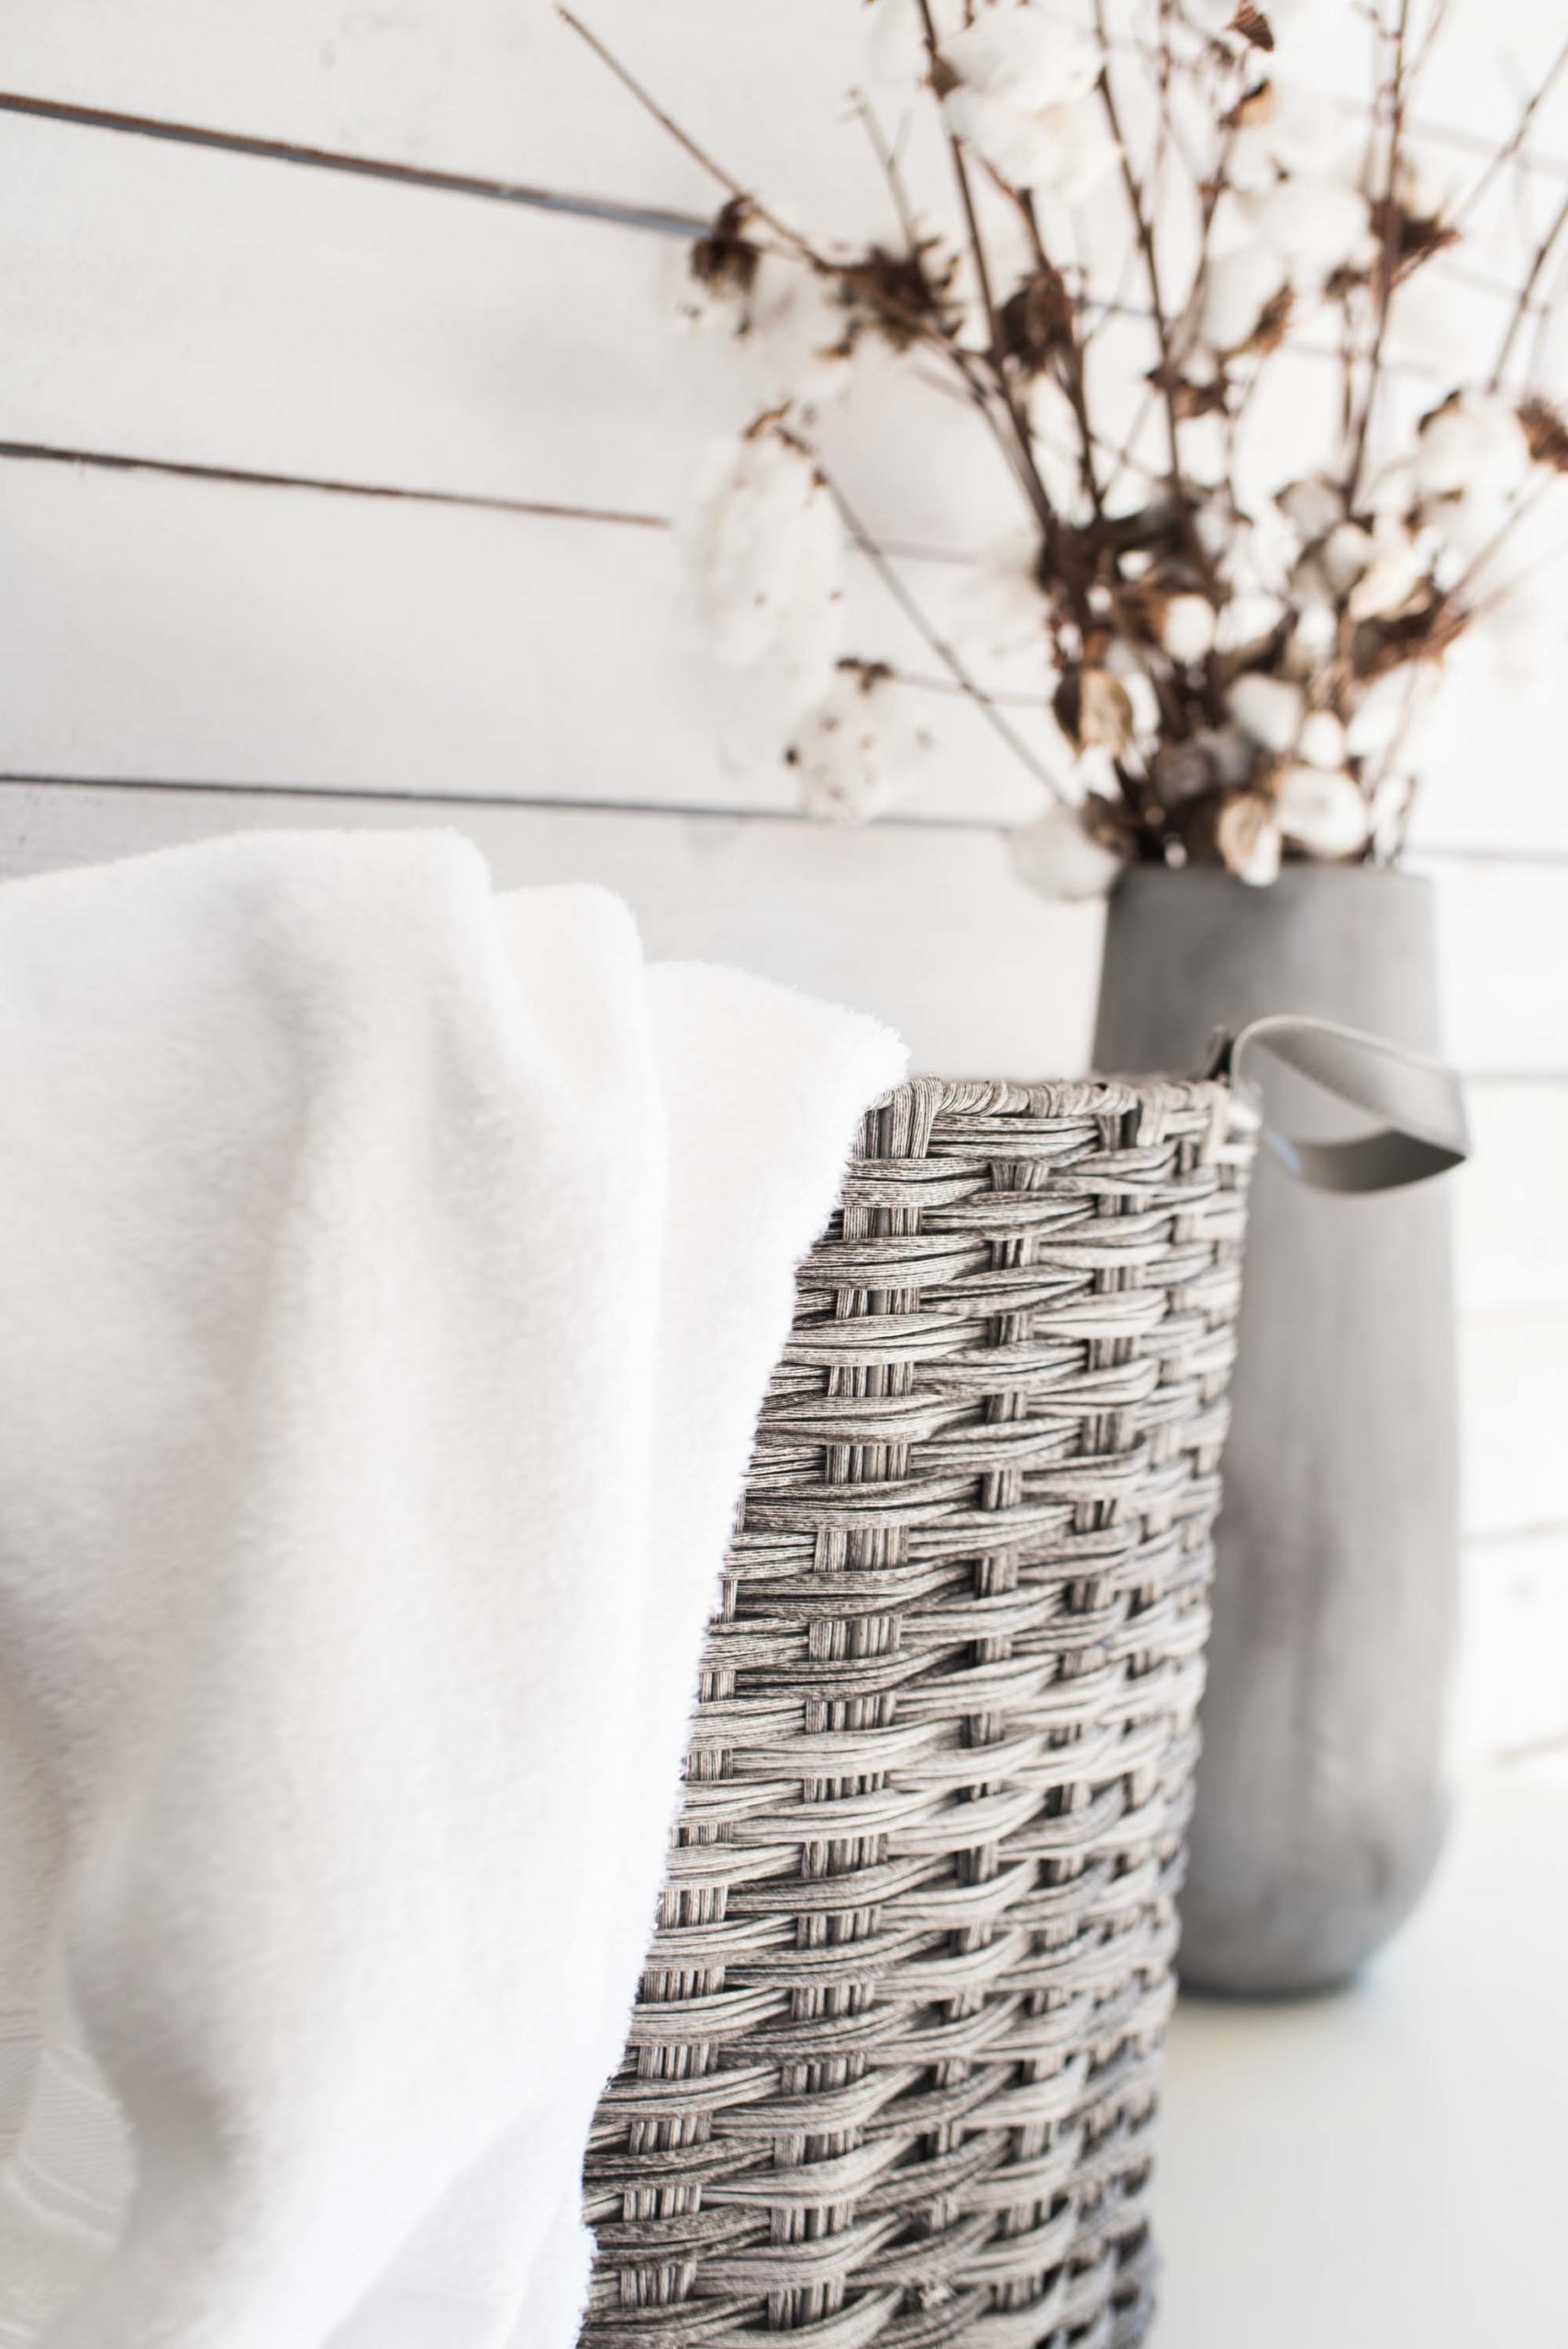 My favorite cozy blankets to snuggle up in